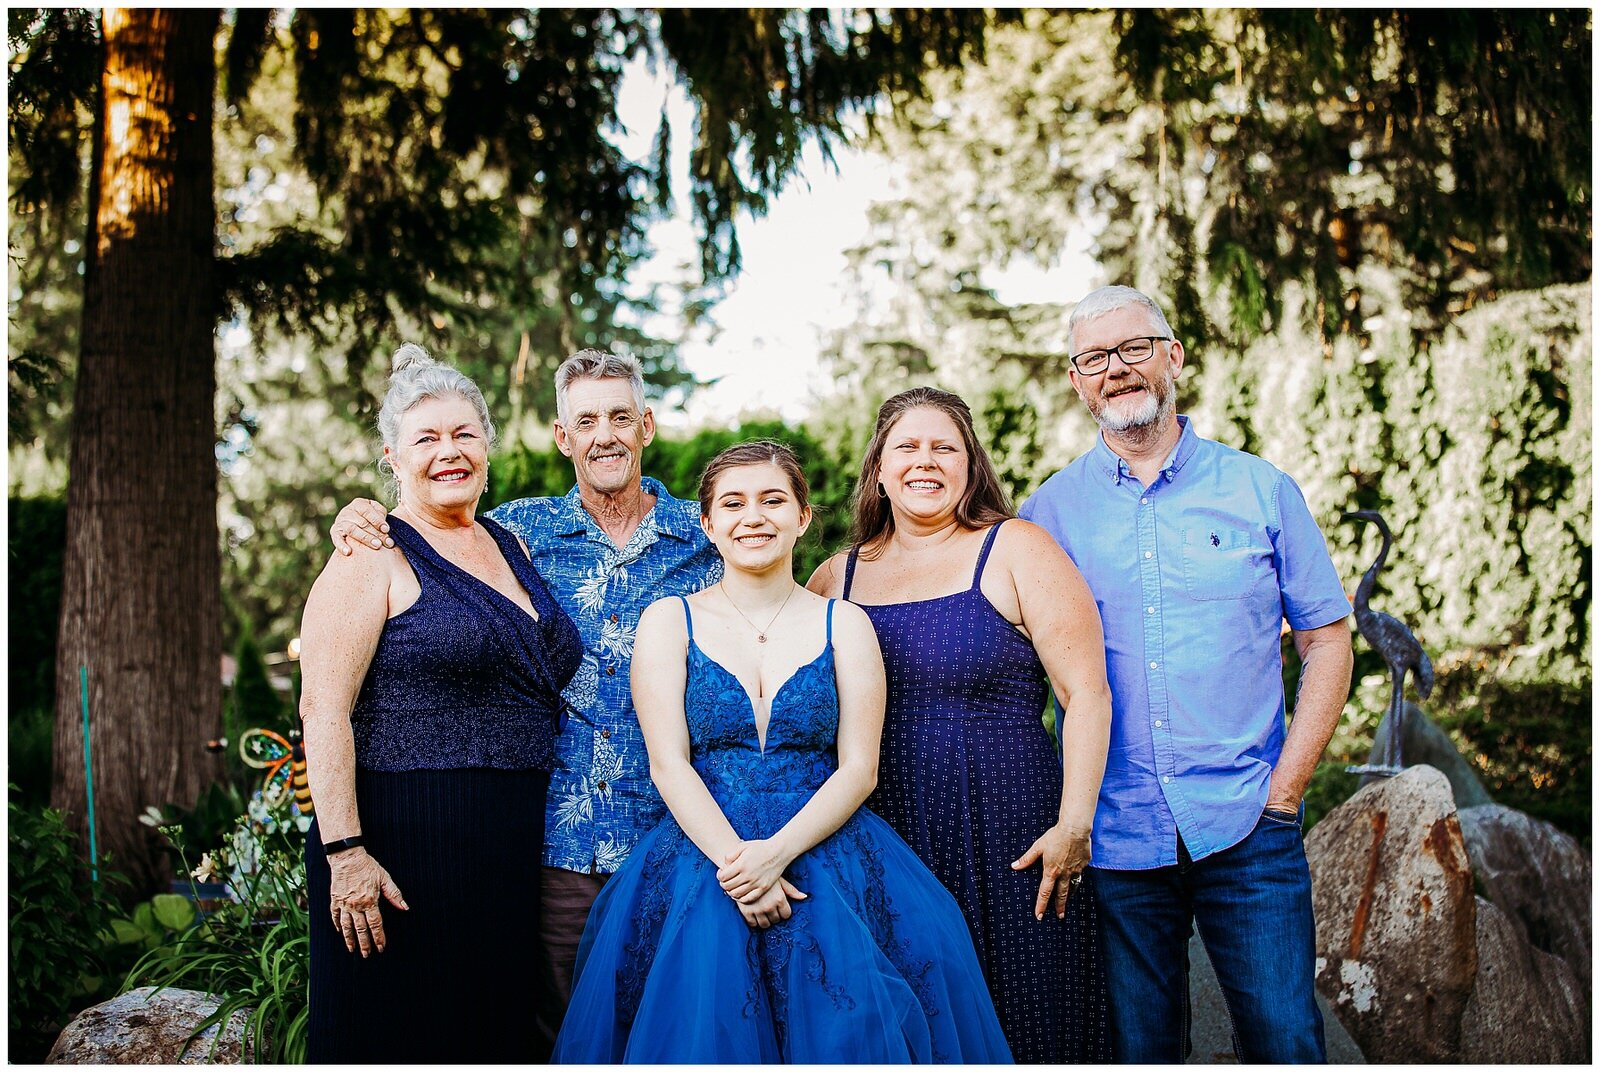 Abbotsford-Prom-Family-Photographer